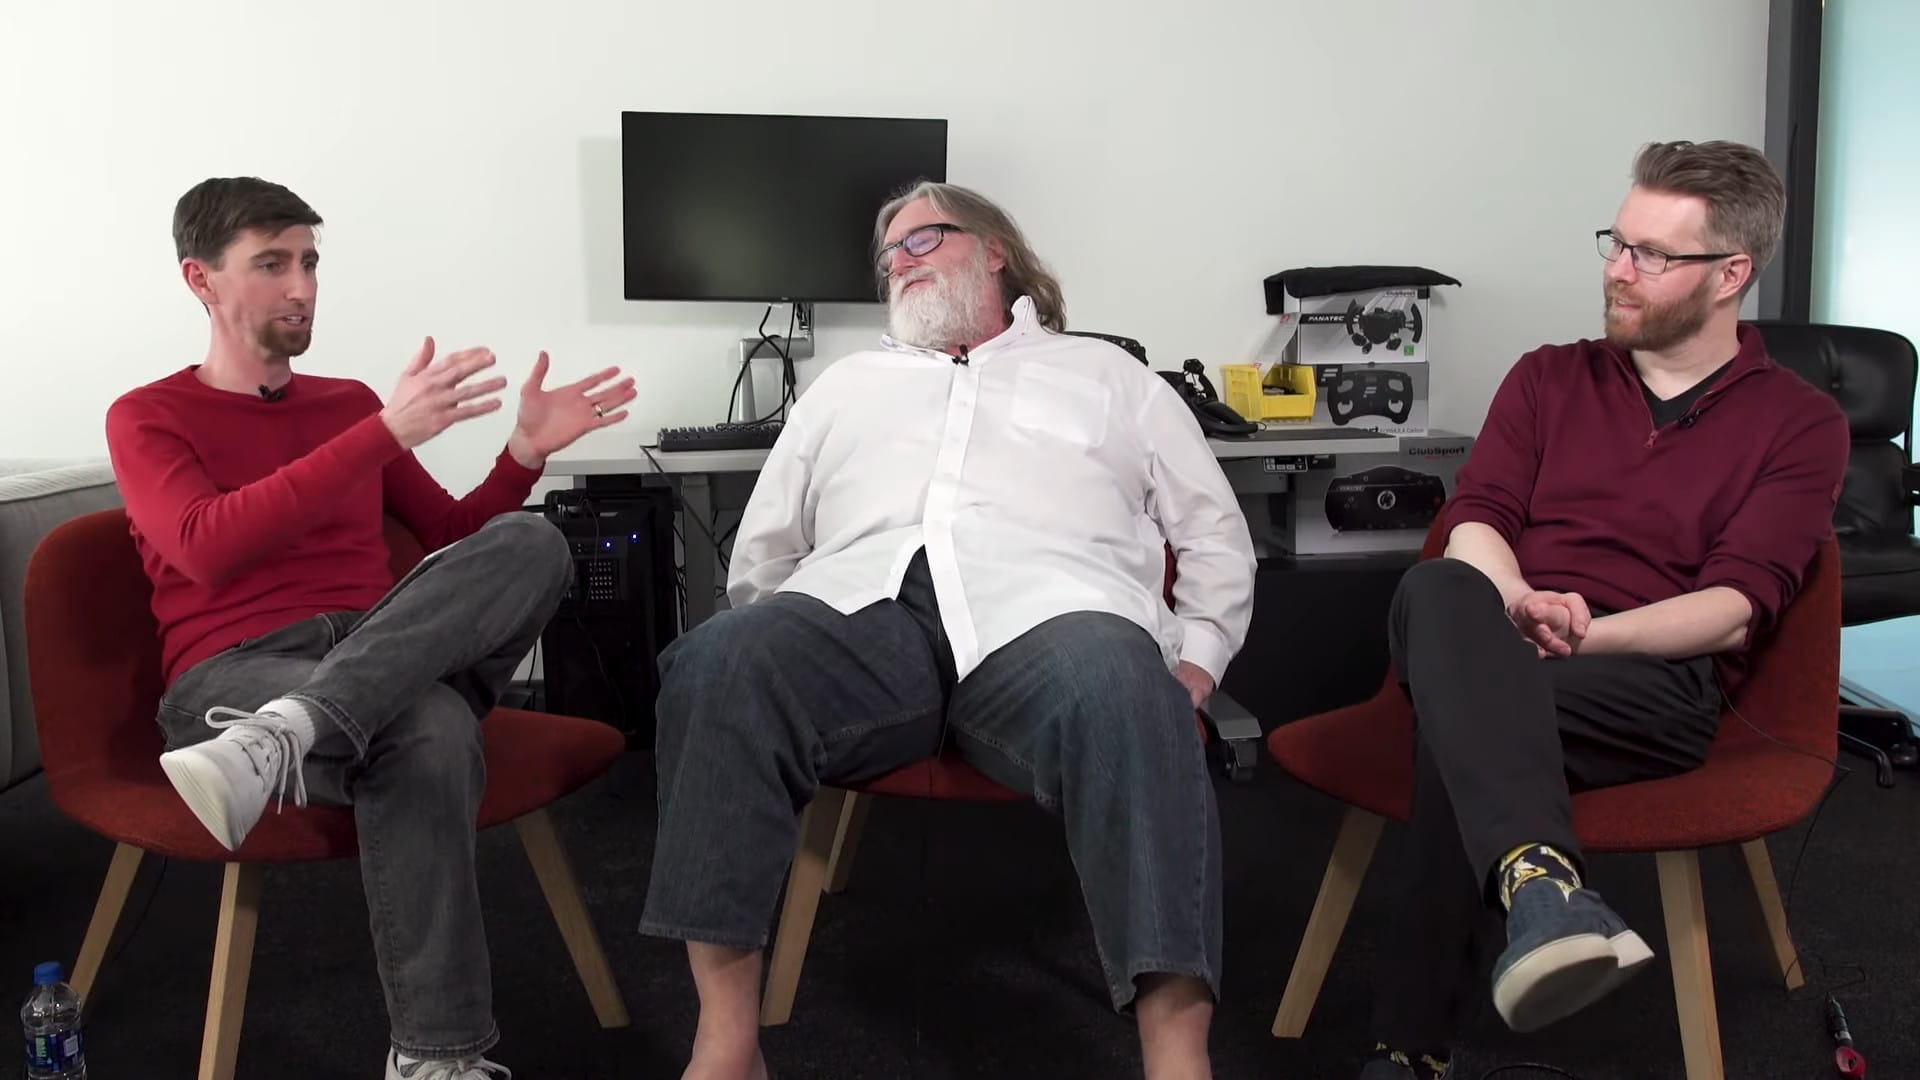 Gabe Newell on Brain-computer Interfaces: 'We're way closer to The Matrix  than people realize